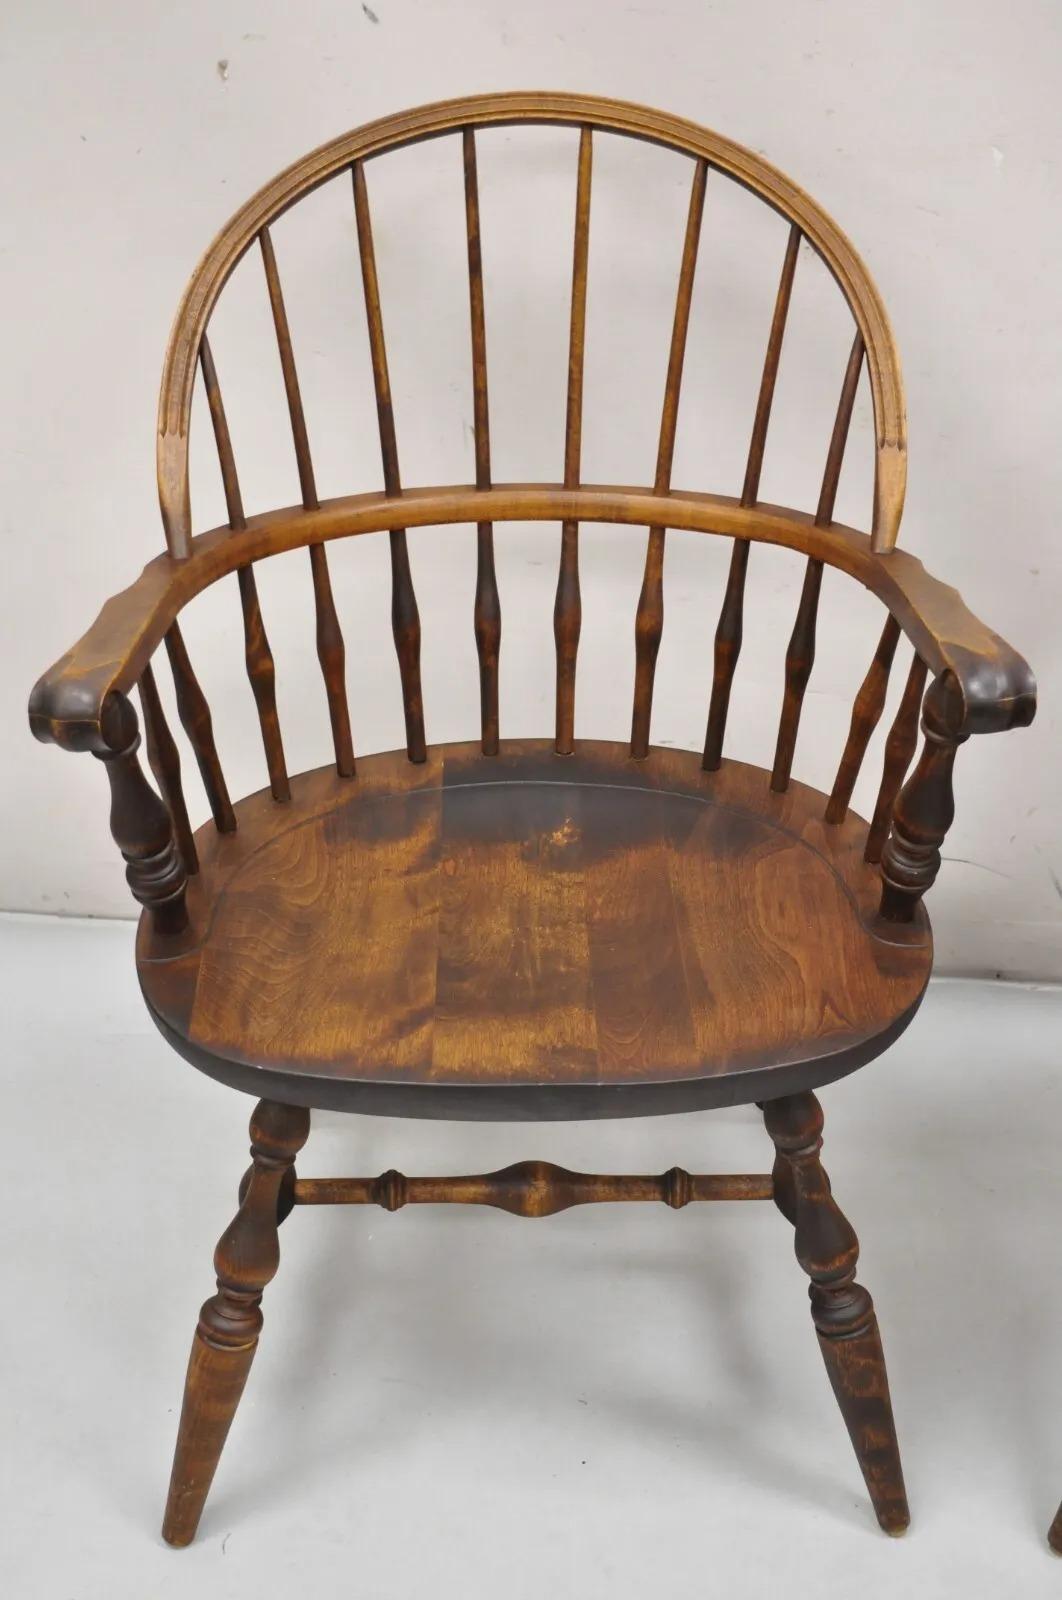 American Colonial Nichols & Stone Rock Maple Wood Bowback Colonial Windsor Arm Chairs - a Pair For Sale